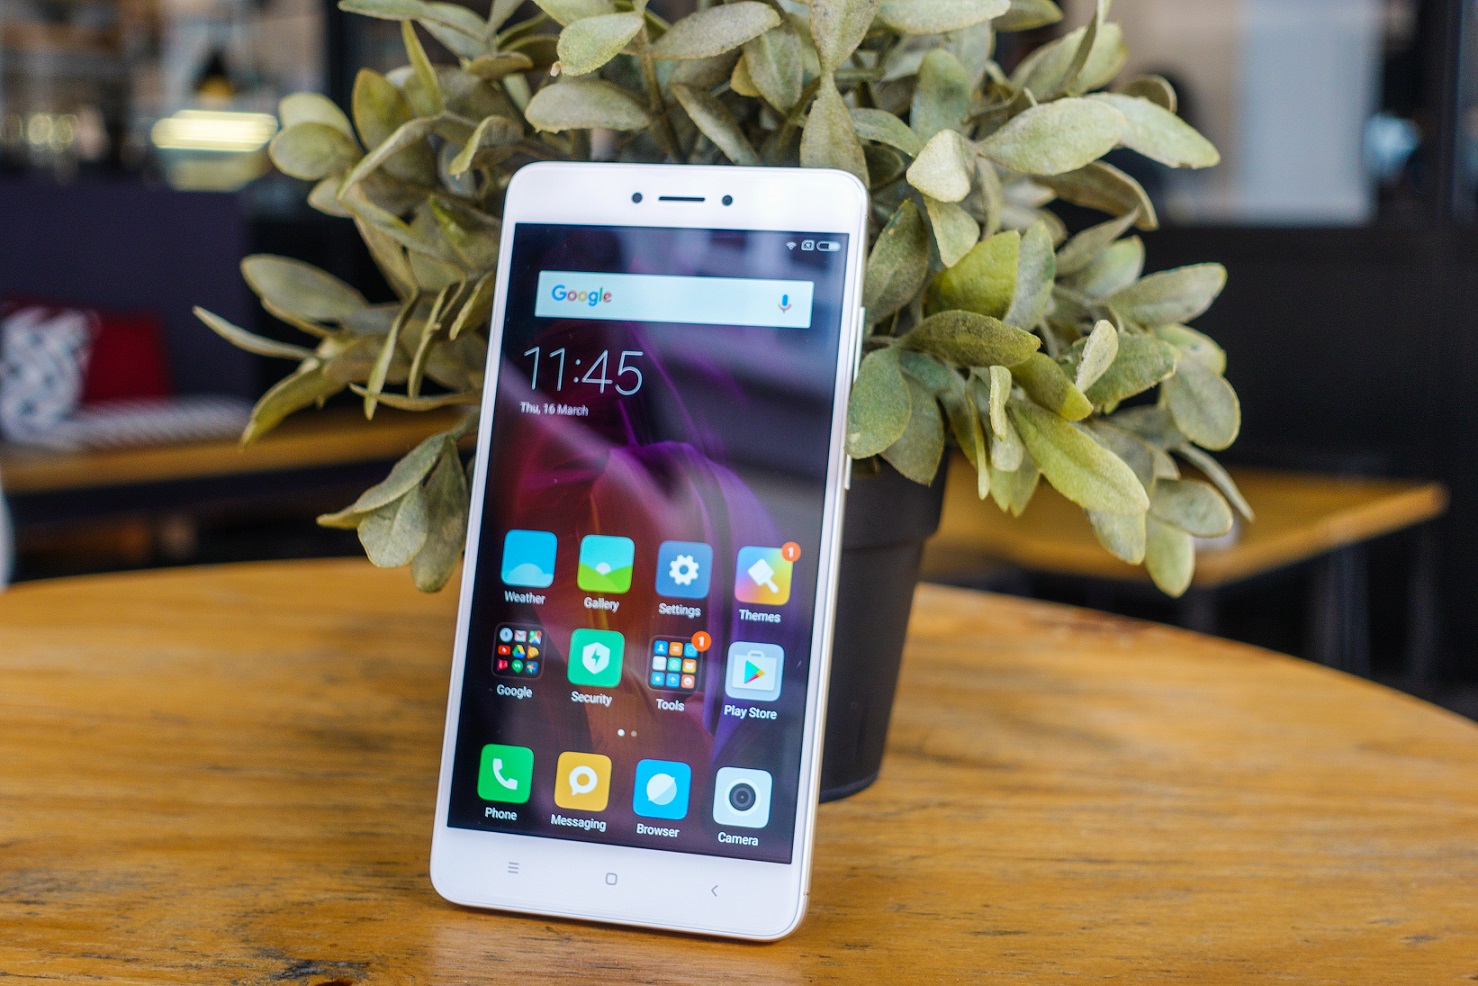 Xiaomi’s Redmi Note 4 packs power in your pocket